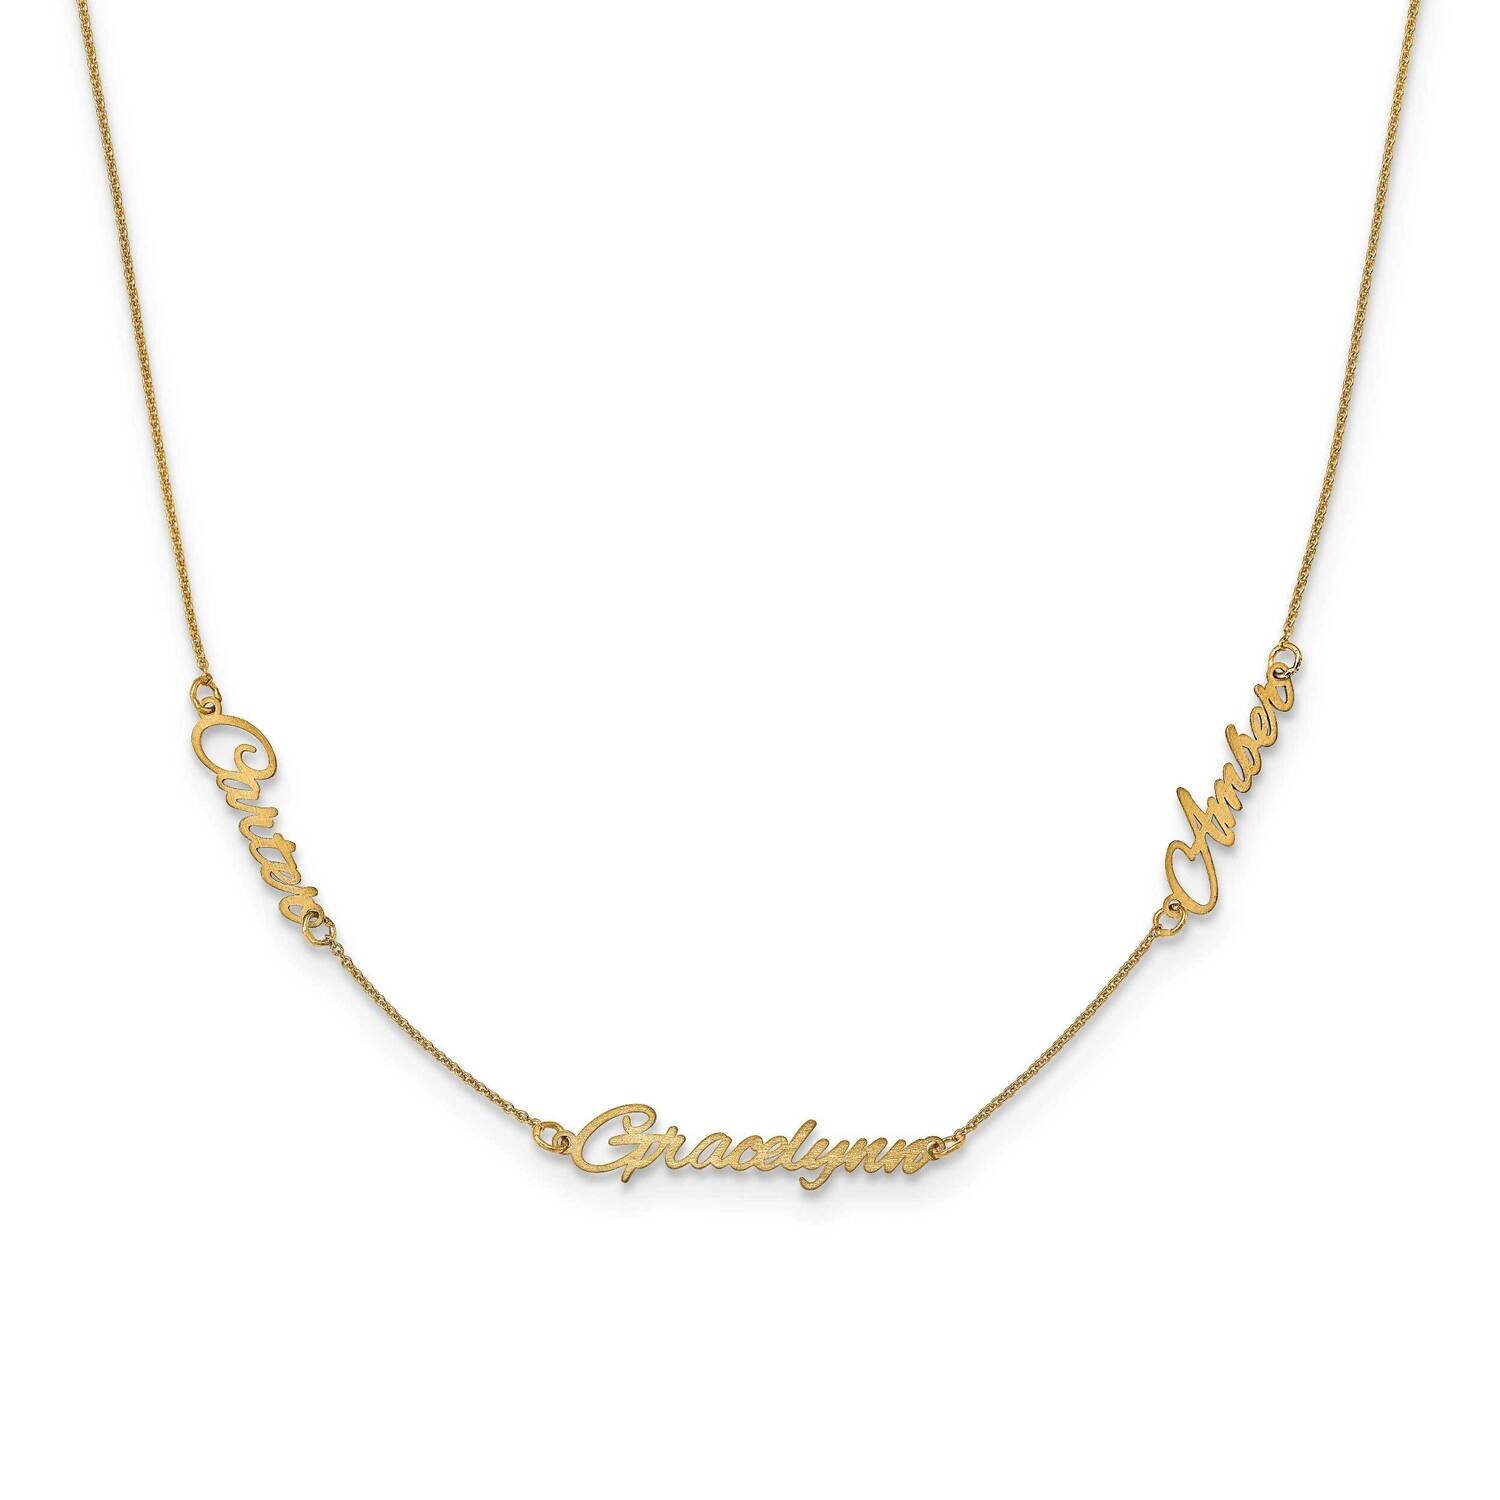 Brushed 3 Name Necklace Sterling Silver Gold-plated XNA879GP